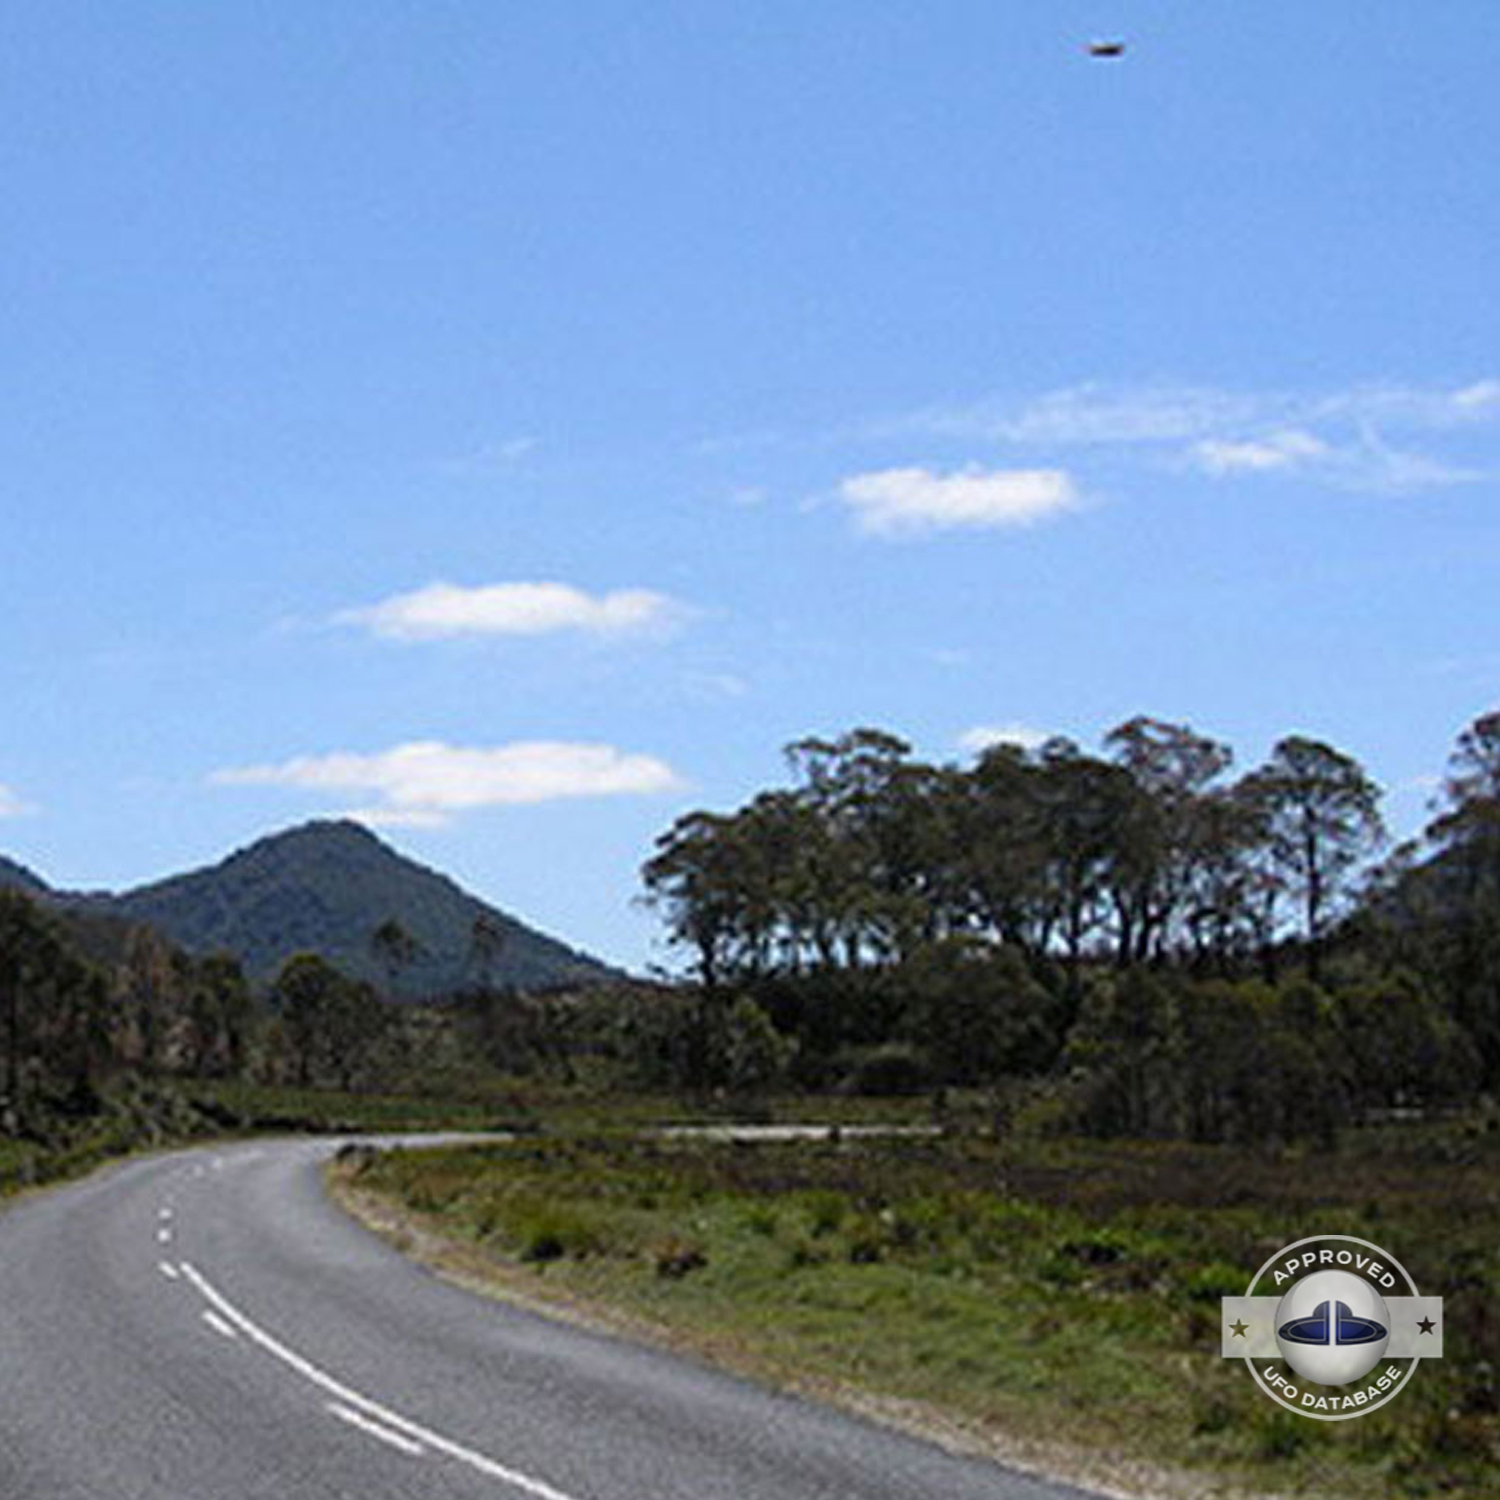 UFO picture taken in Tasmania on A10 highway going from south to north UFO Picture #80-2